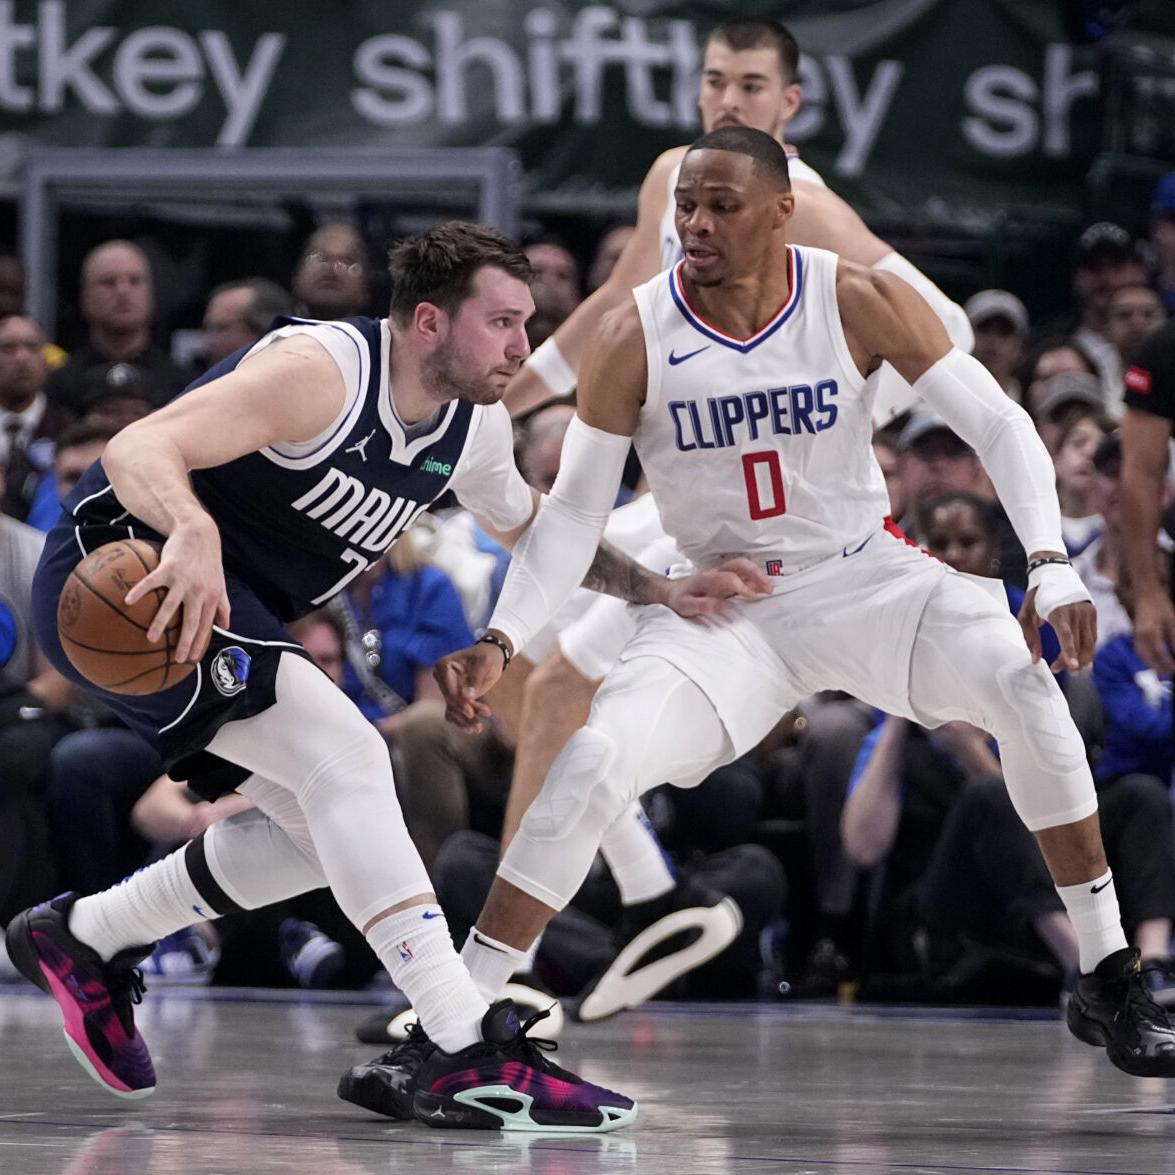 Clippers-Mavs: 5 takeaways as Mavs grab upper hand - Clippers' Defensive Struggles